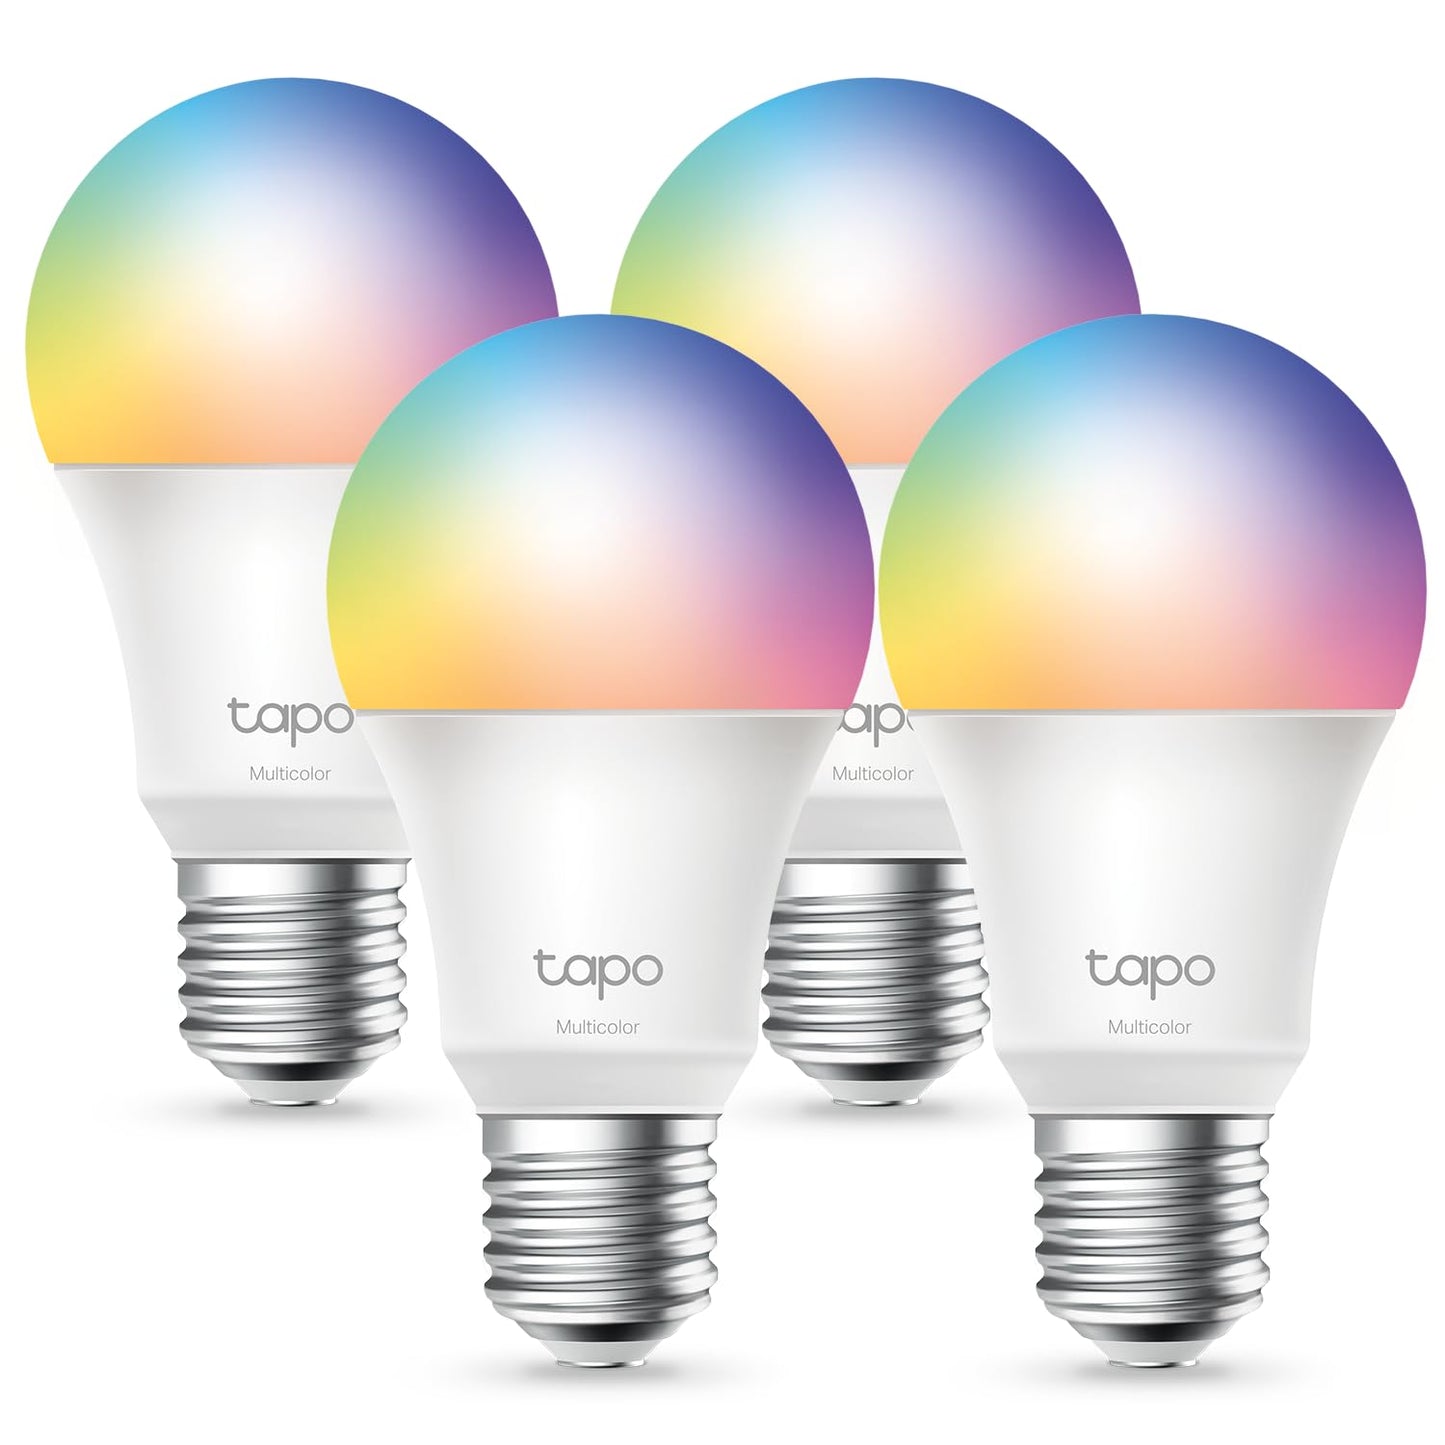 TP-Link Tapo Smart Wi-Fi Light Bulbs, 16M Colors RGBW, Dimmable, Compatible w/Alexa and Google Home, A19, 60W Equivalent, 800LM, 2.4GHz WiFi only, No Hub Required, Tapo L530E(4-Pack)